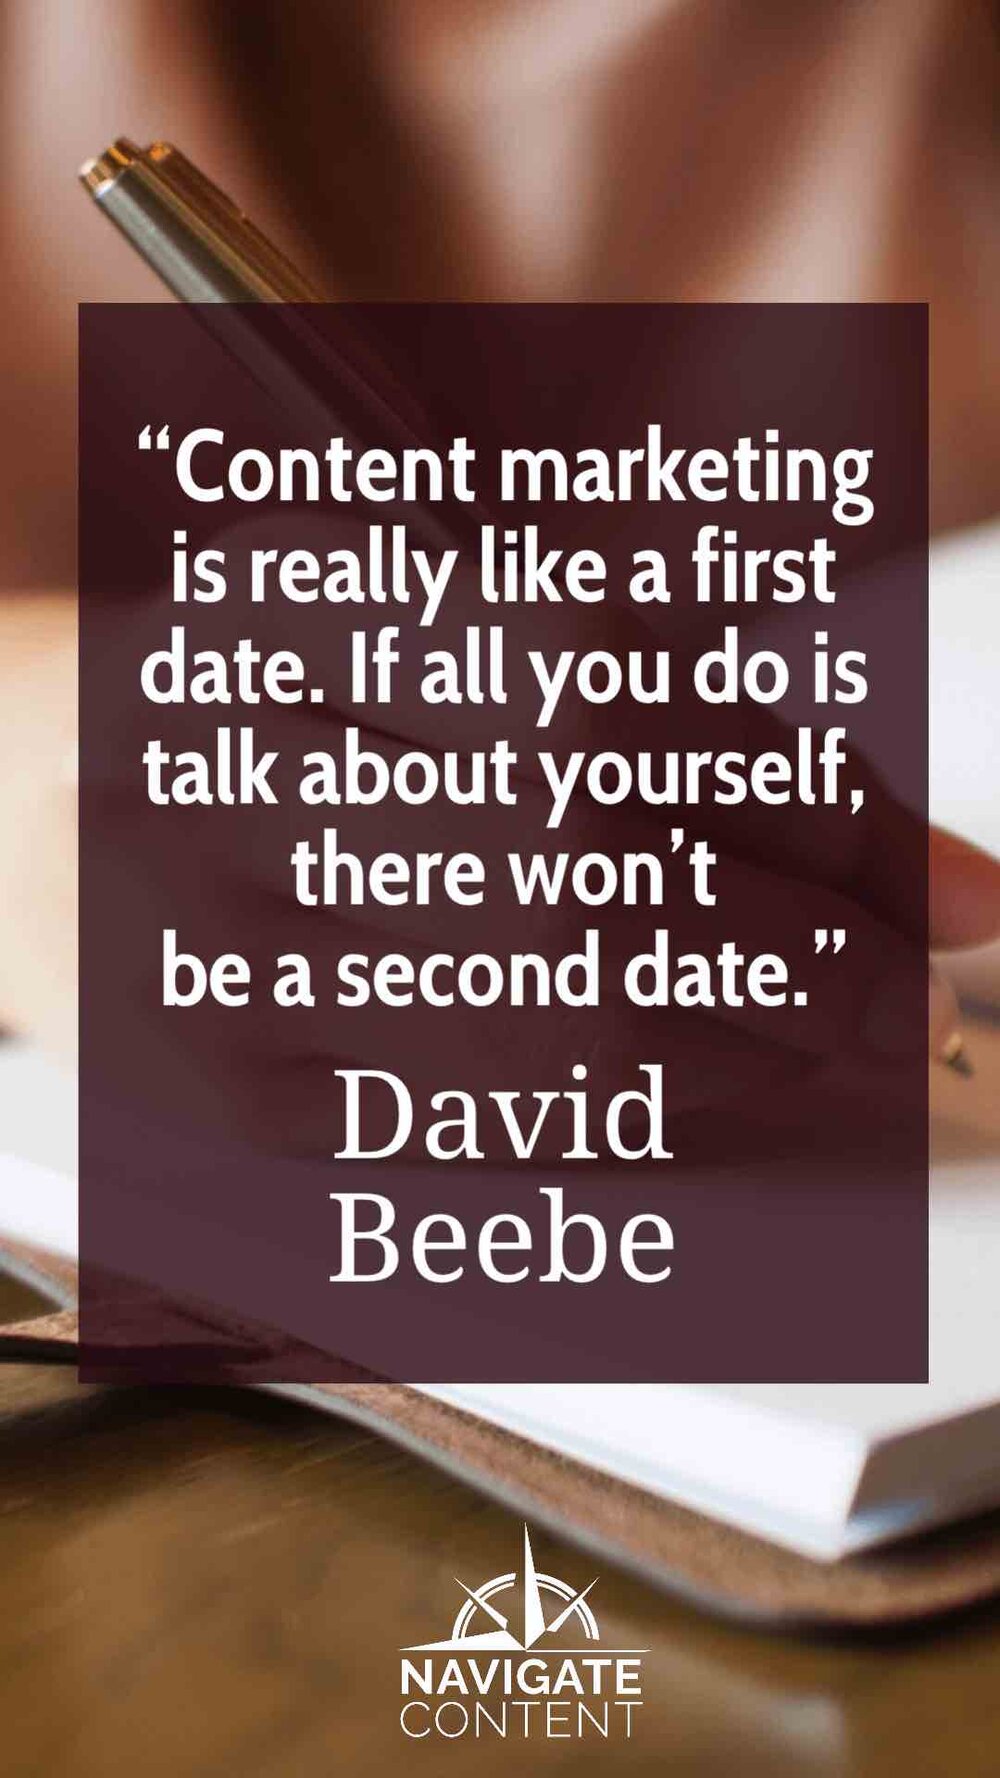 Inspiration for content marketing